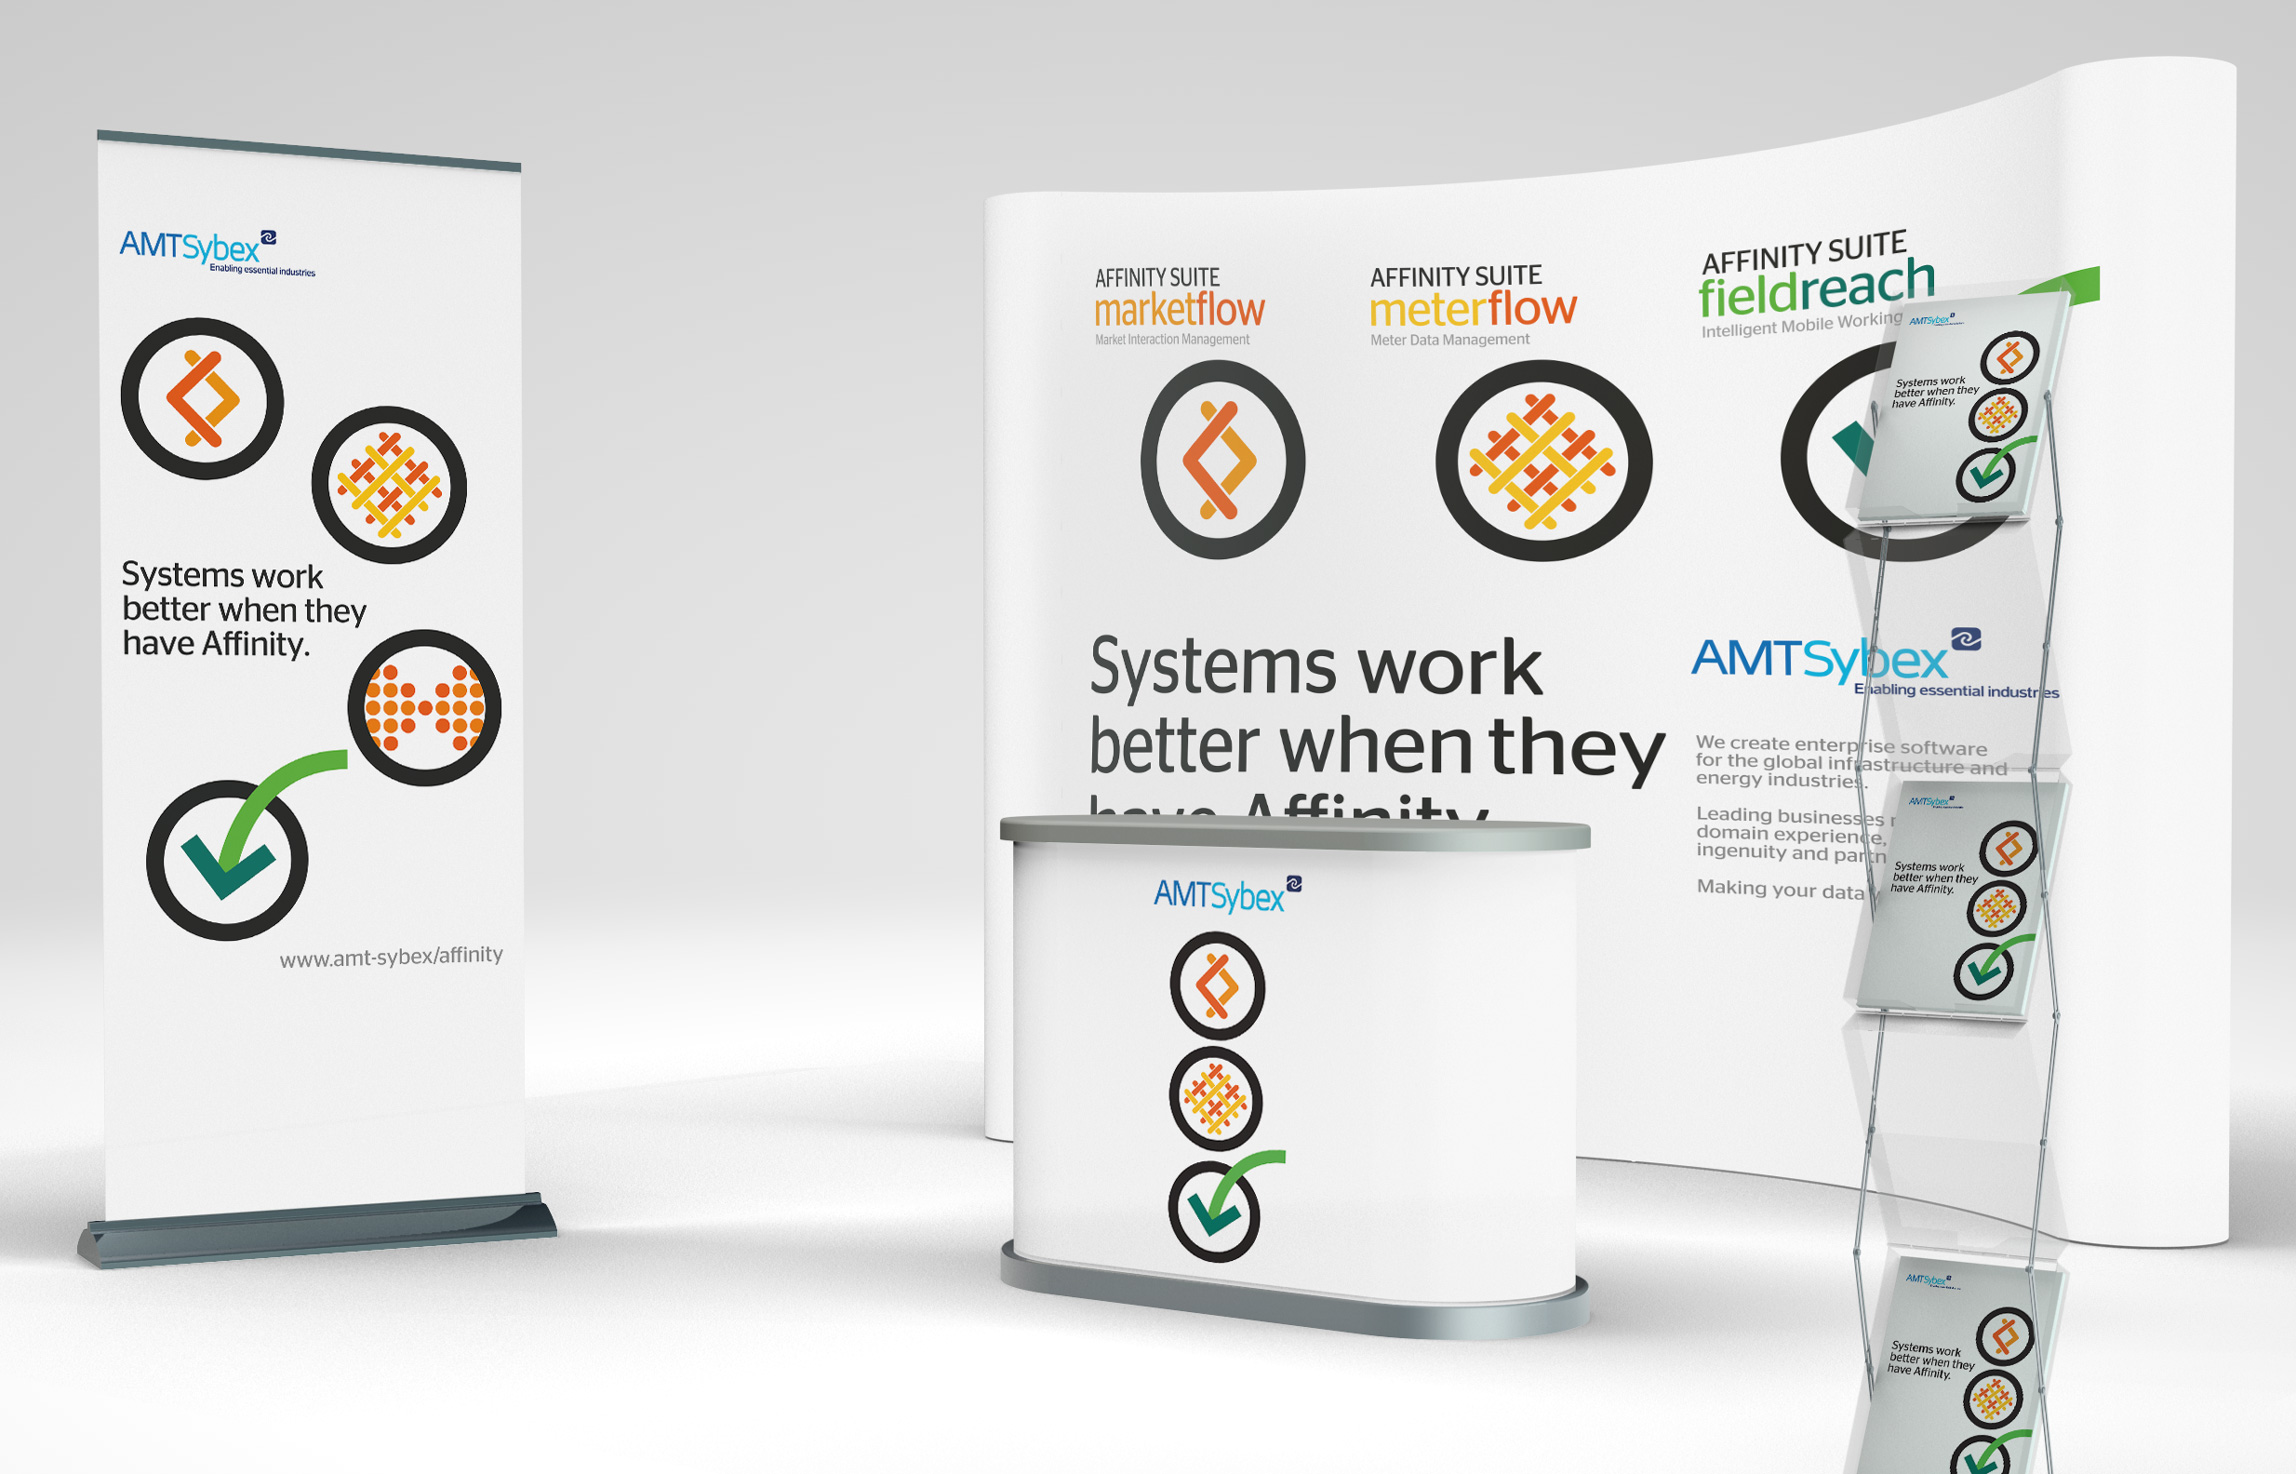 amt sybex technology rebrand product affinity suite marketing